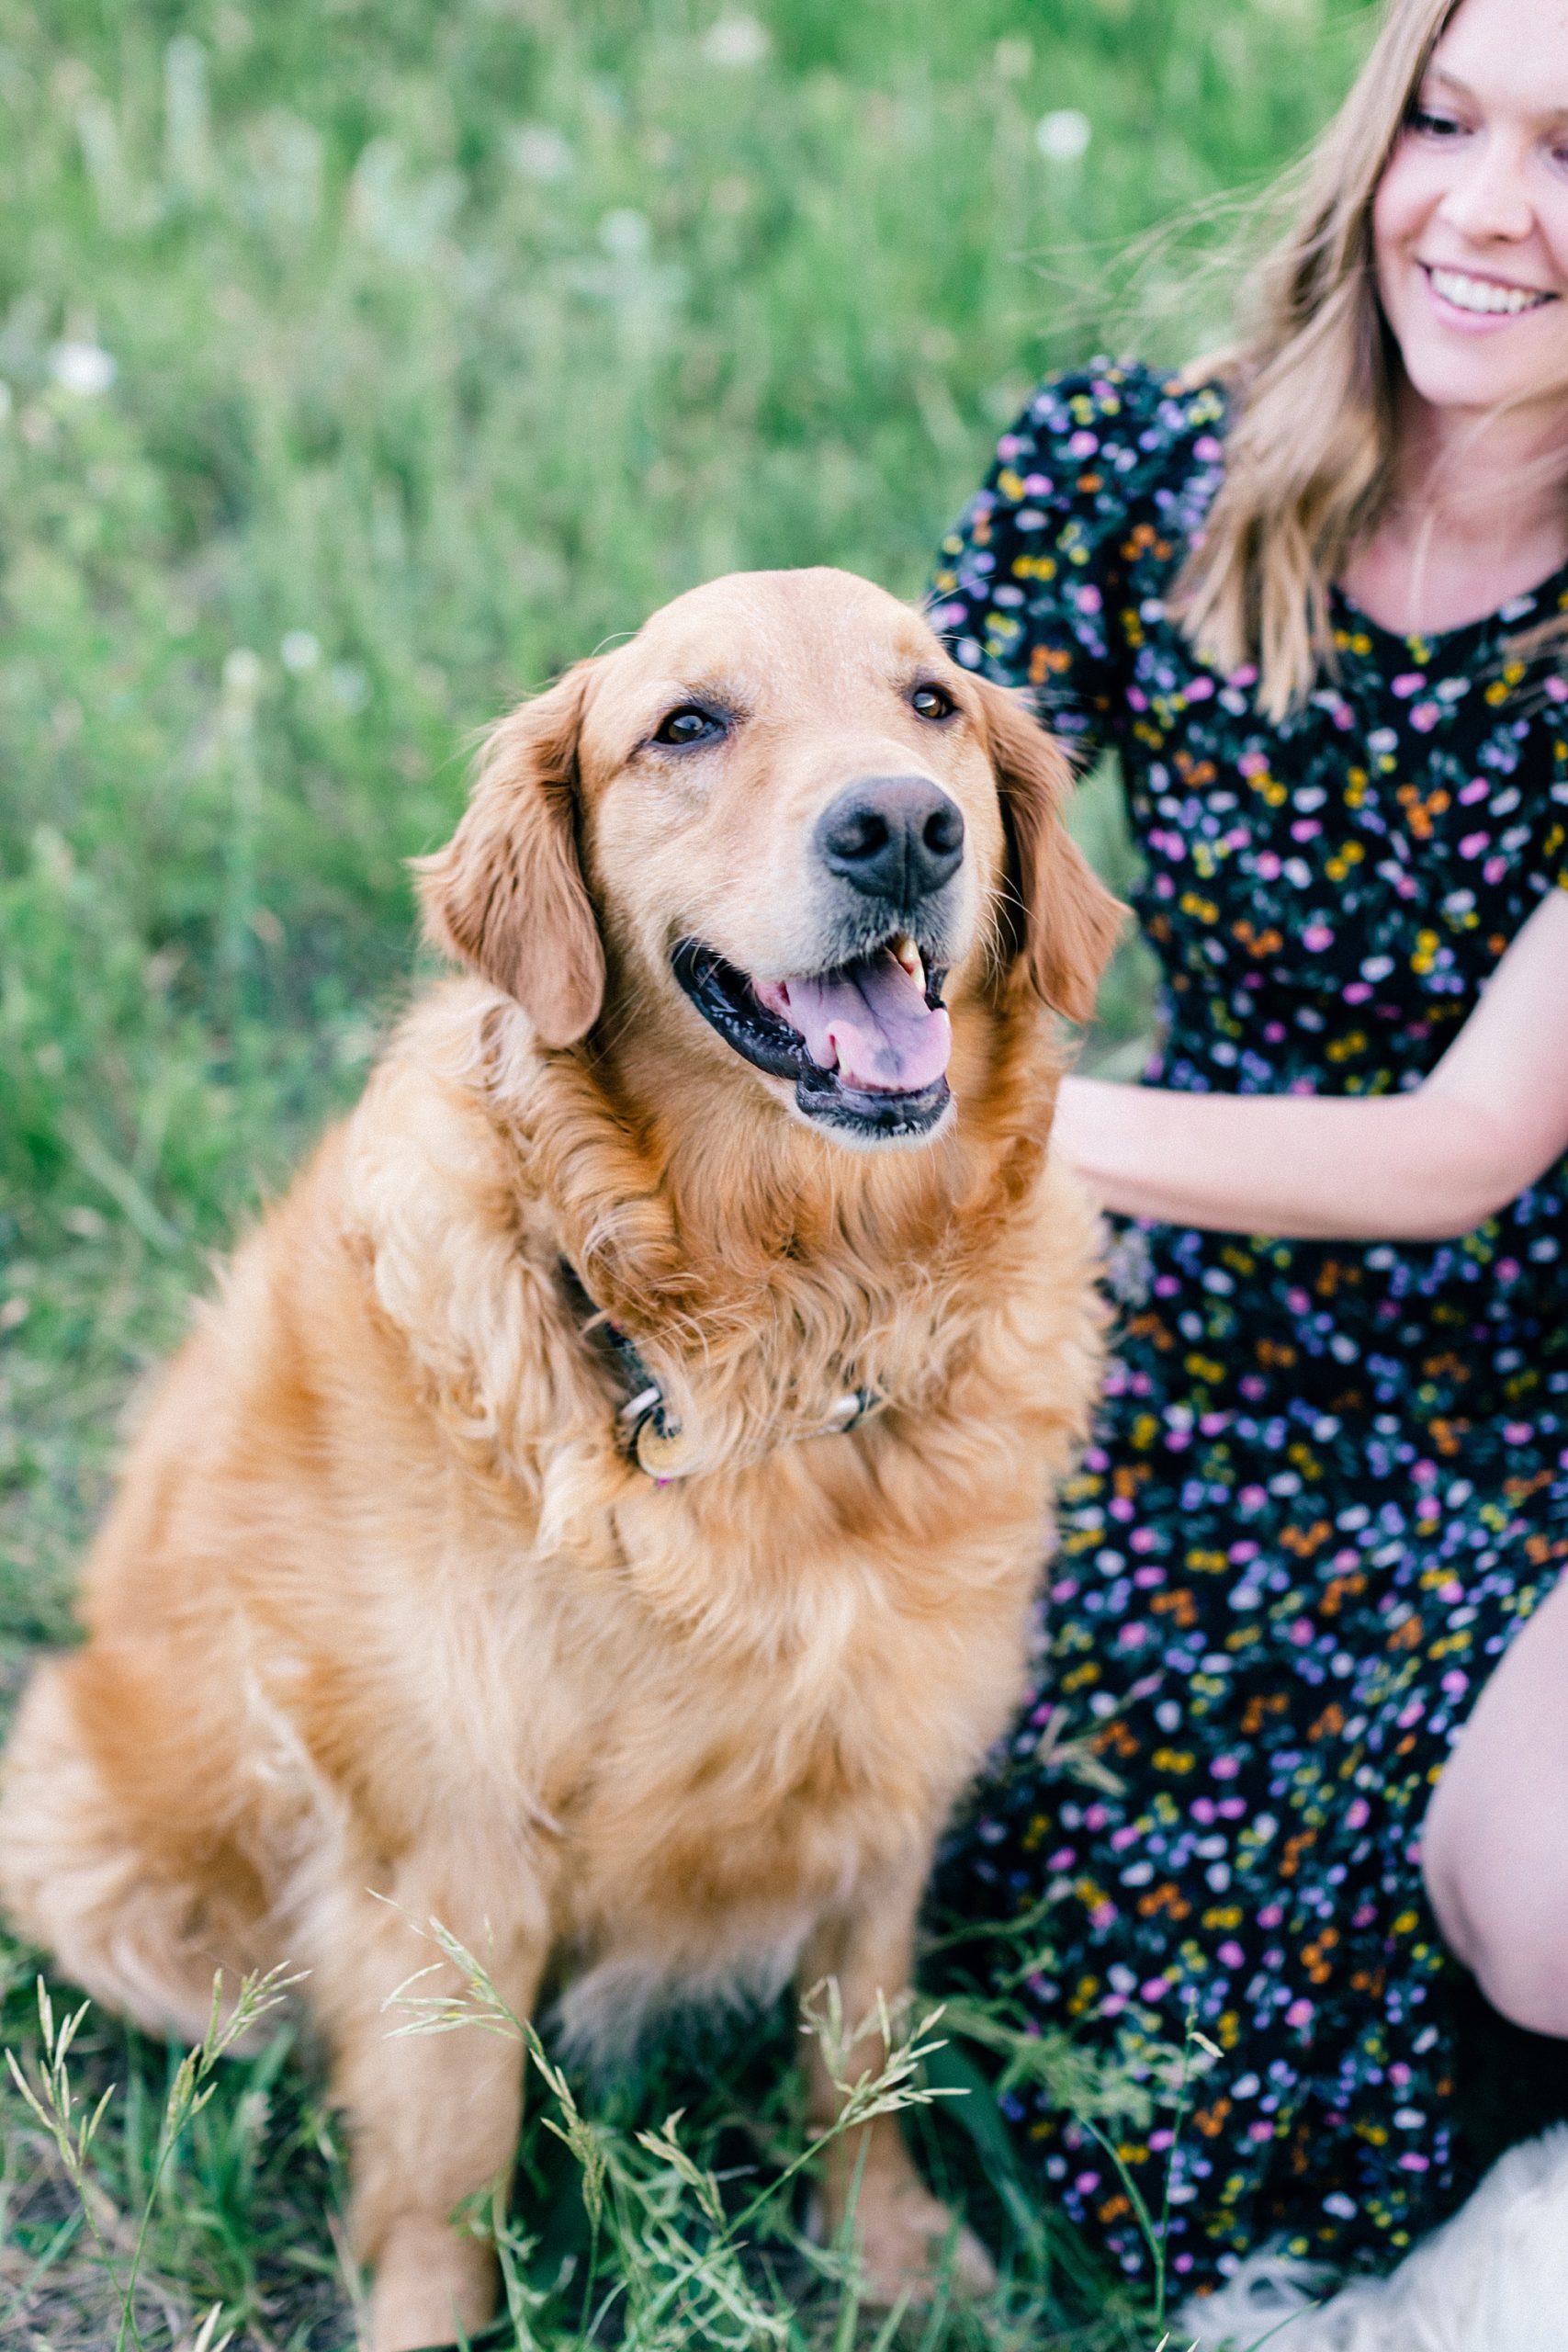 engagement session with dog in Colorado; spring engagement photos; photographer for engagement